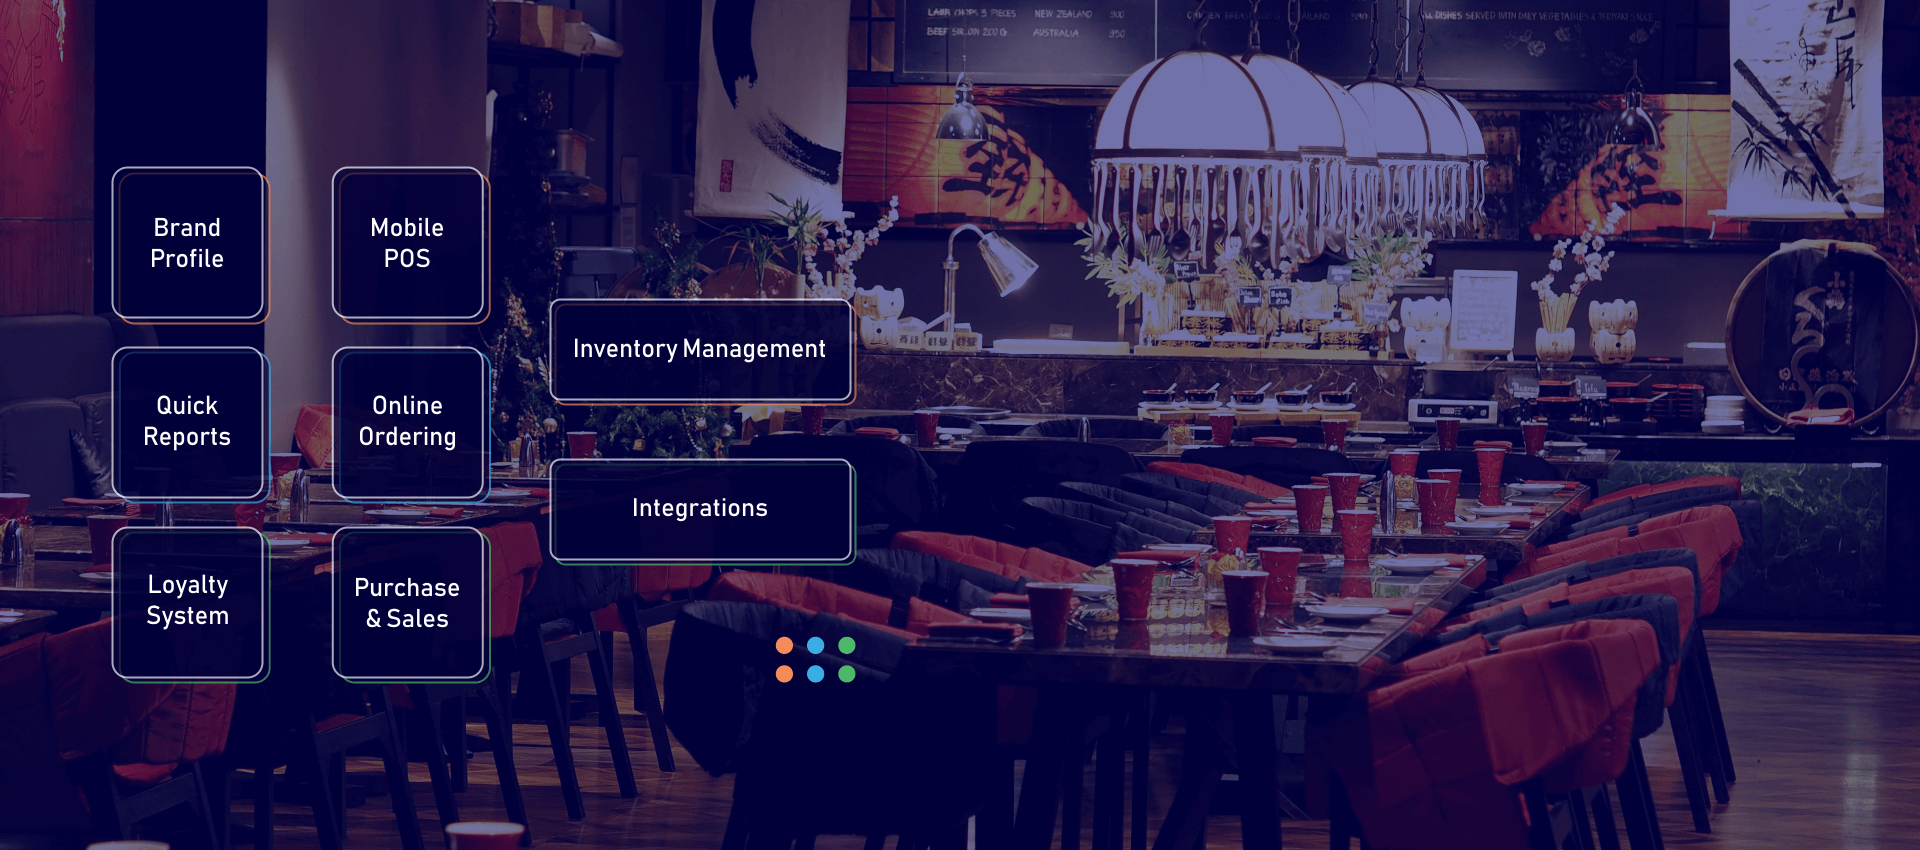 Clearbilling-In-Restaurant